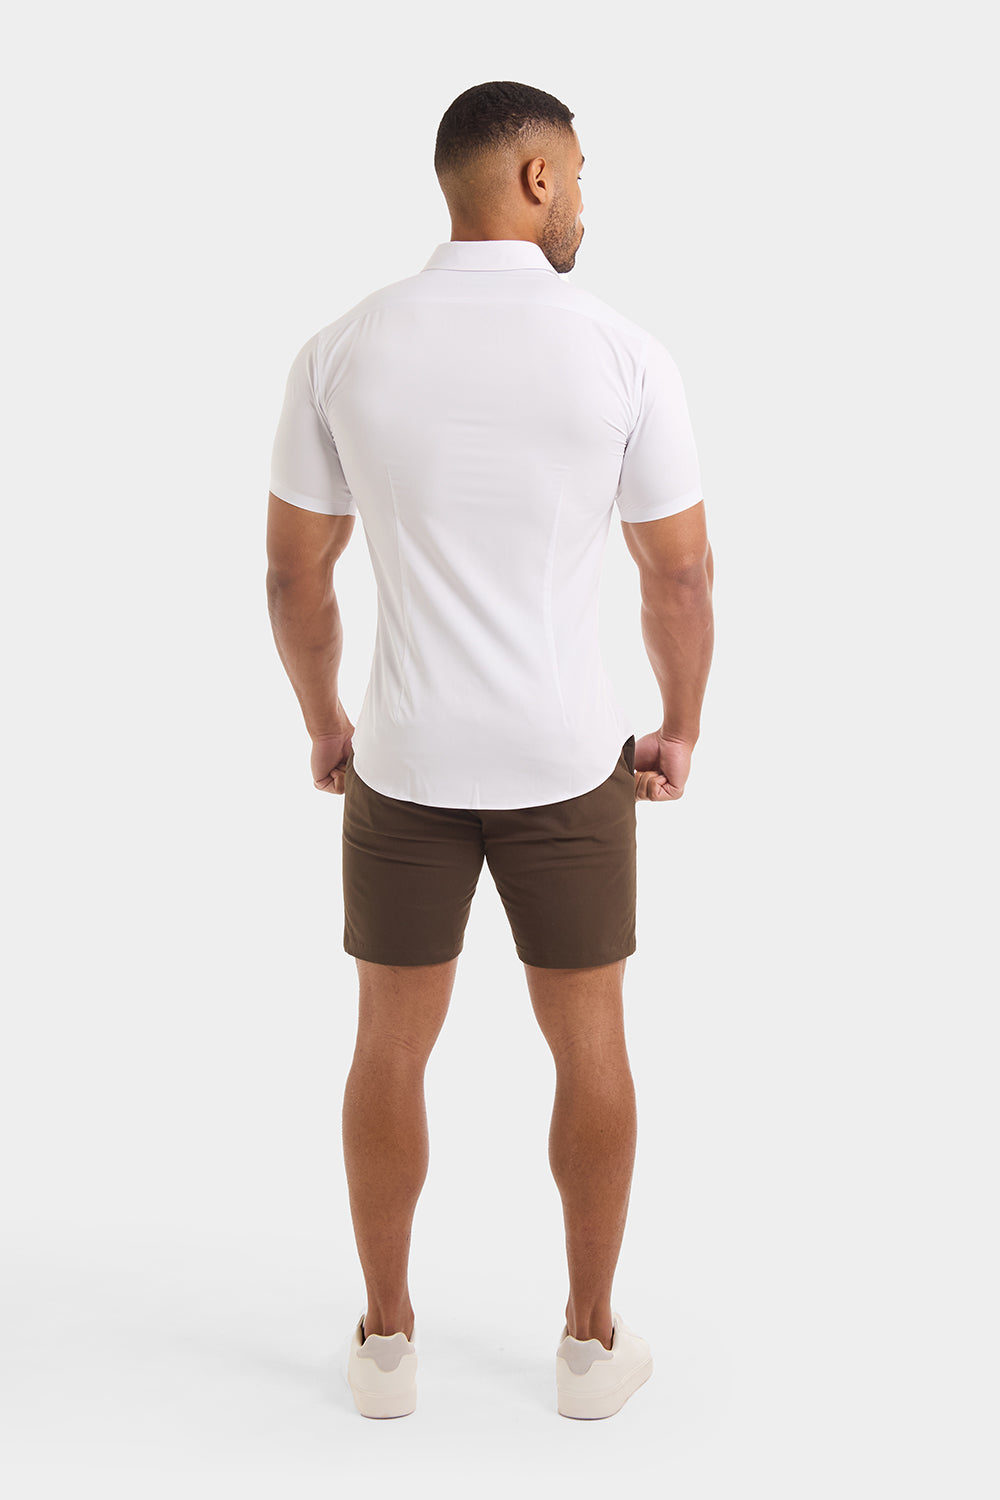 Athletic Fit Short Sleeve Bamboo Shirt in White - TAILORED ATHLETE